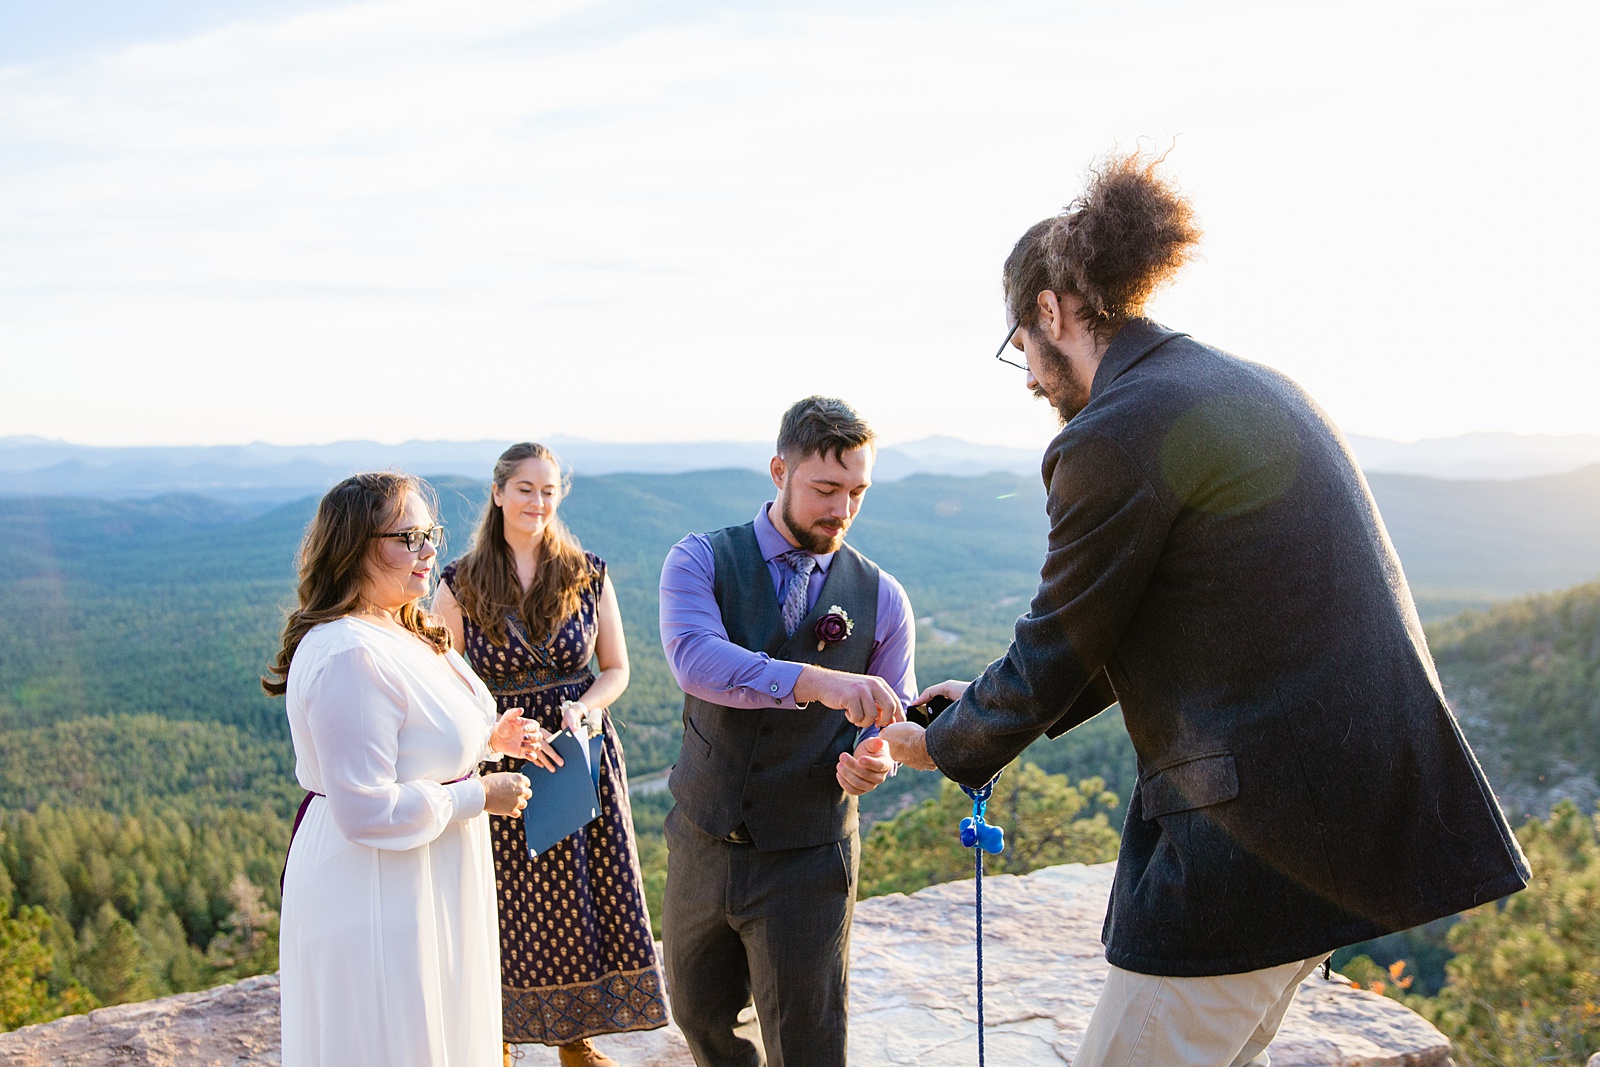 Friend gives the groom rings during a Mogollon Rim elopement by Arizona elopement photographer PMA Photography.